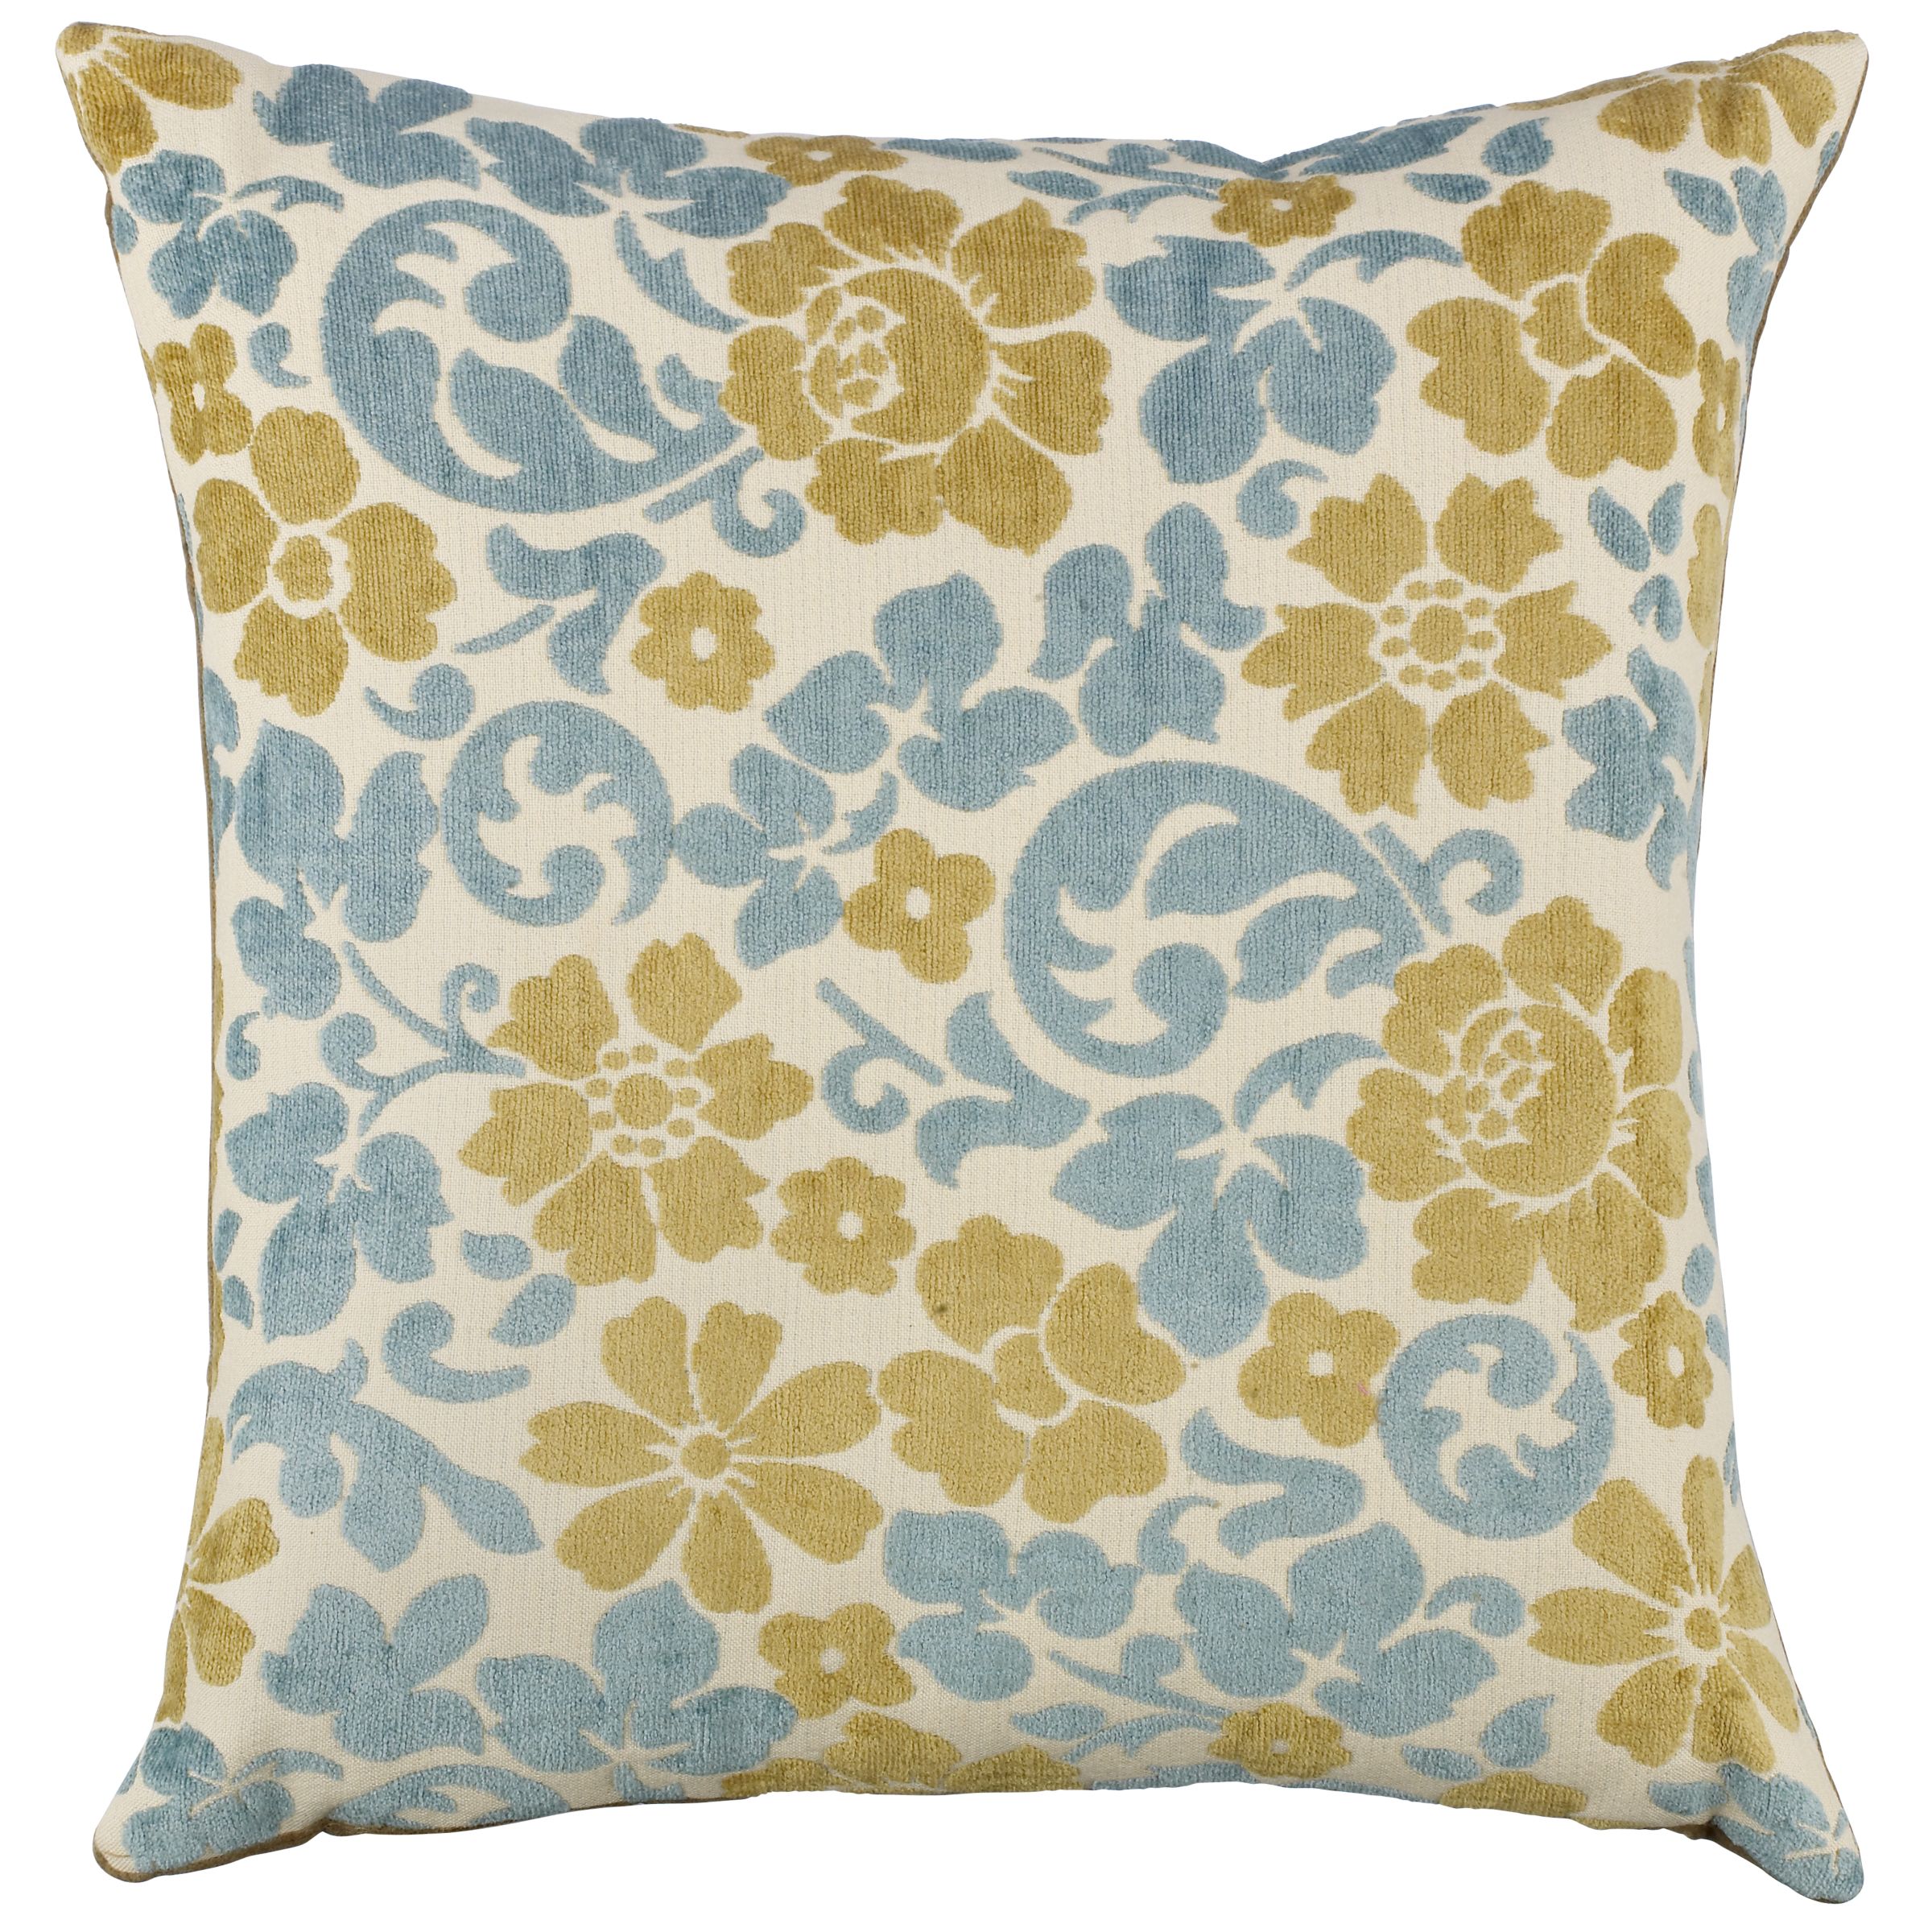 Unbranded Acanthus Scroll Cushion, Blue